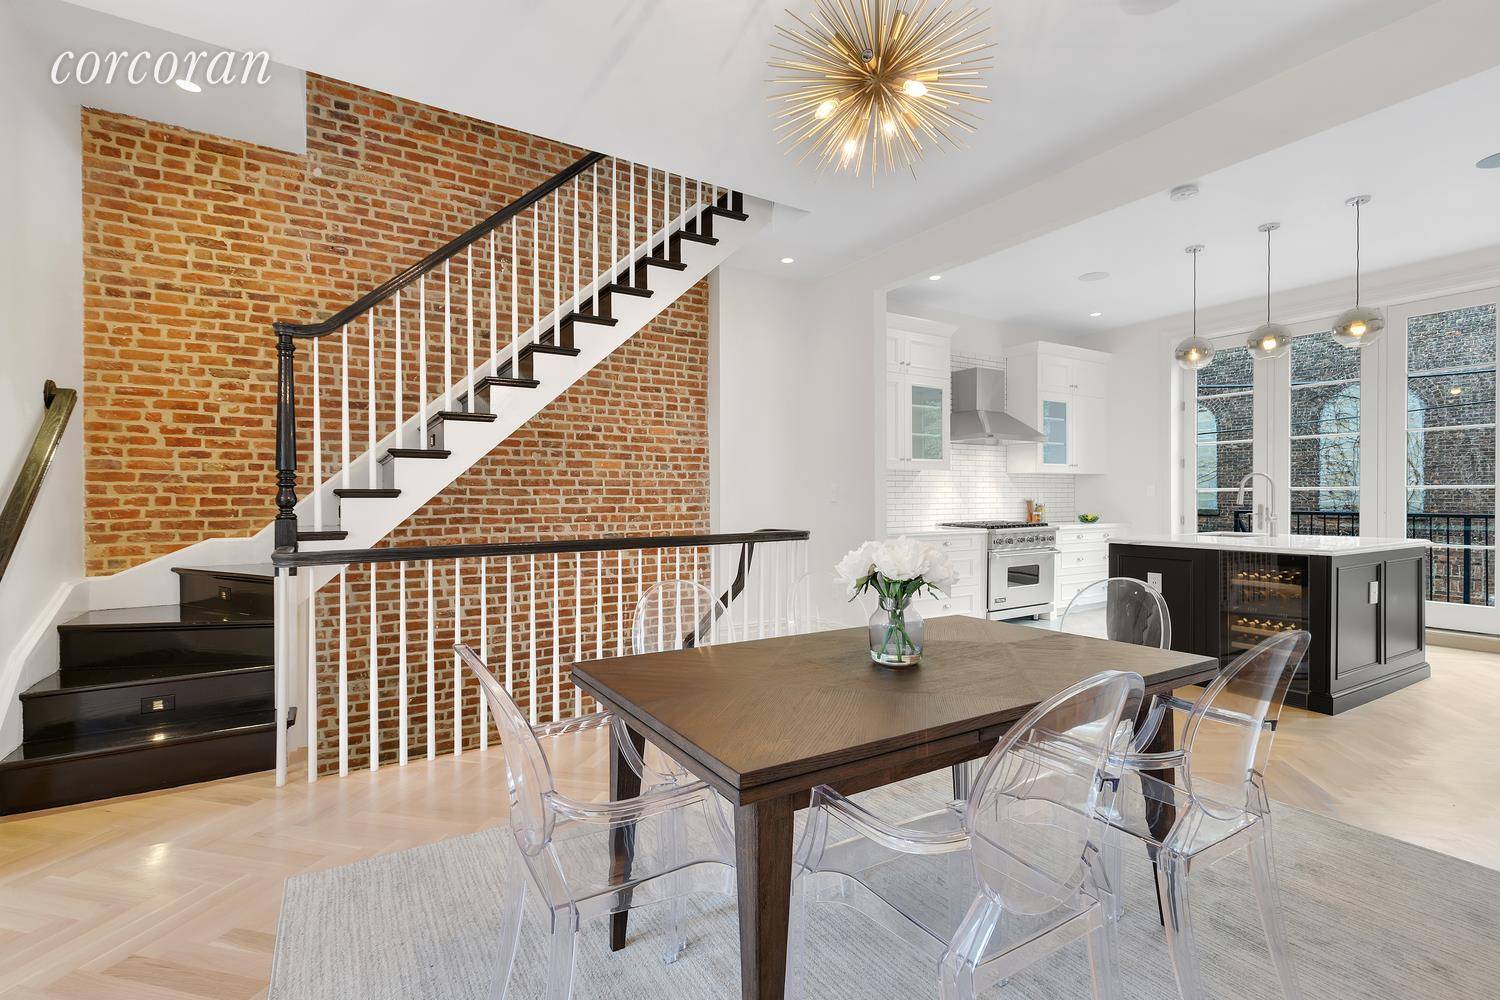 New Price ! Welcome to 226A Vernon Avenue ; a bespoke, luxury two family brownstone that has been meticulously gut renovated to perfectly combine classic townhouse living with todays modern ...